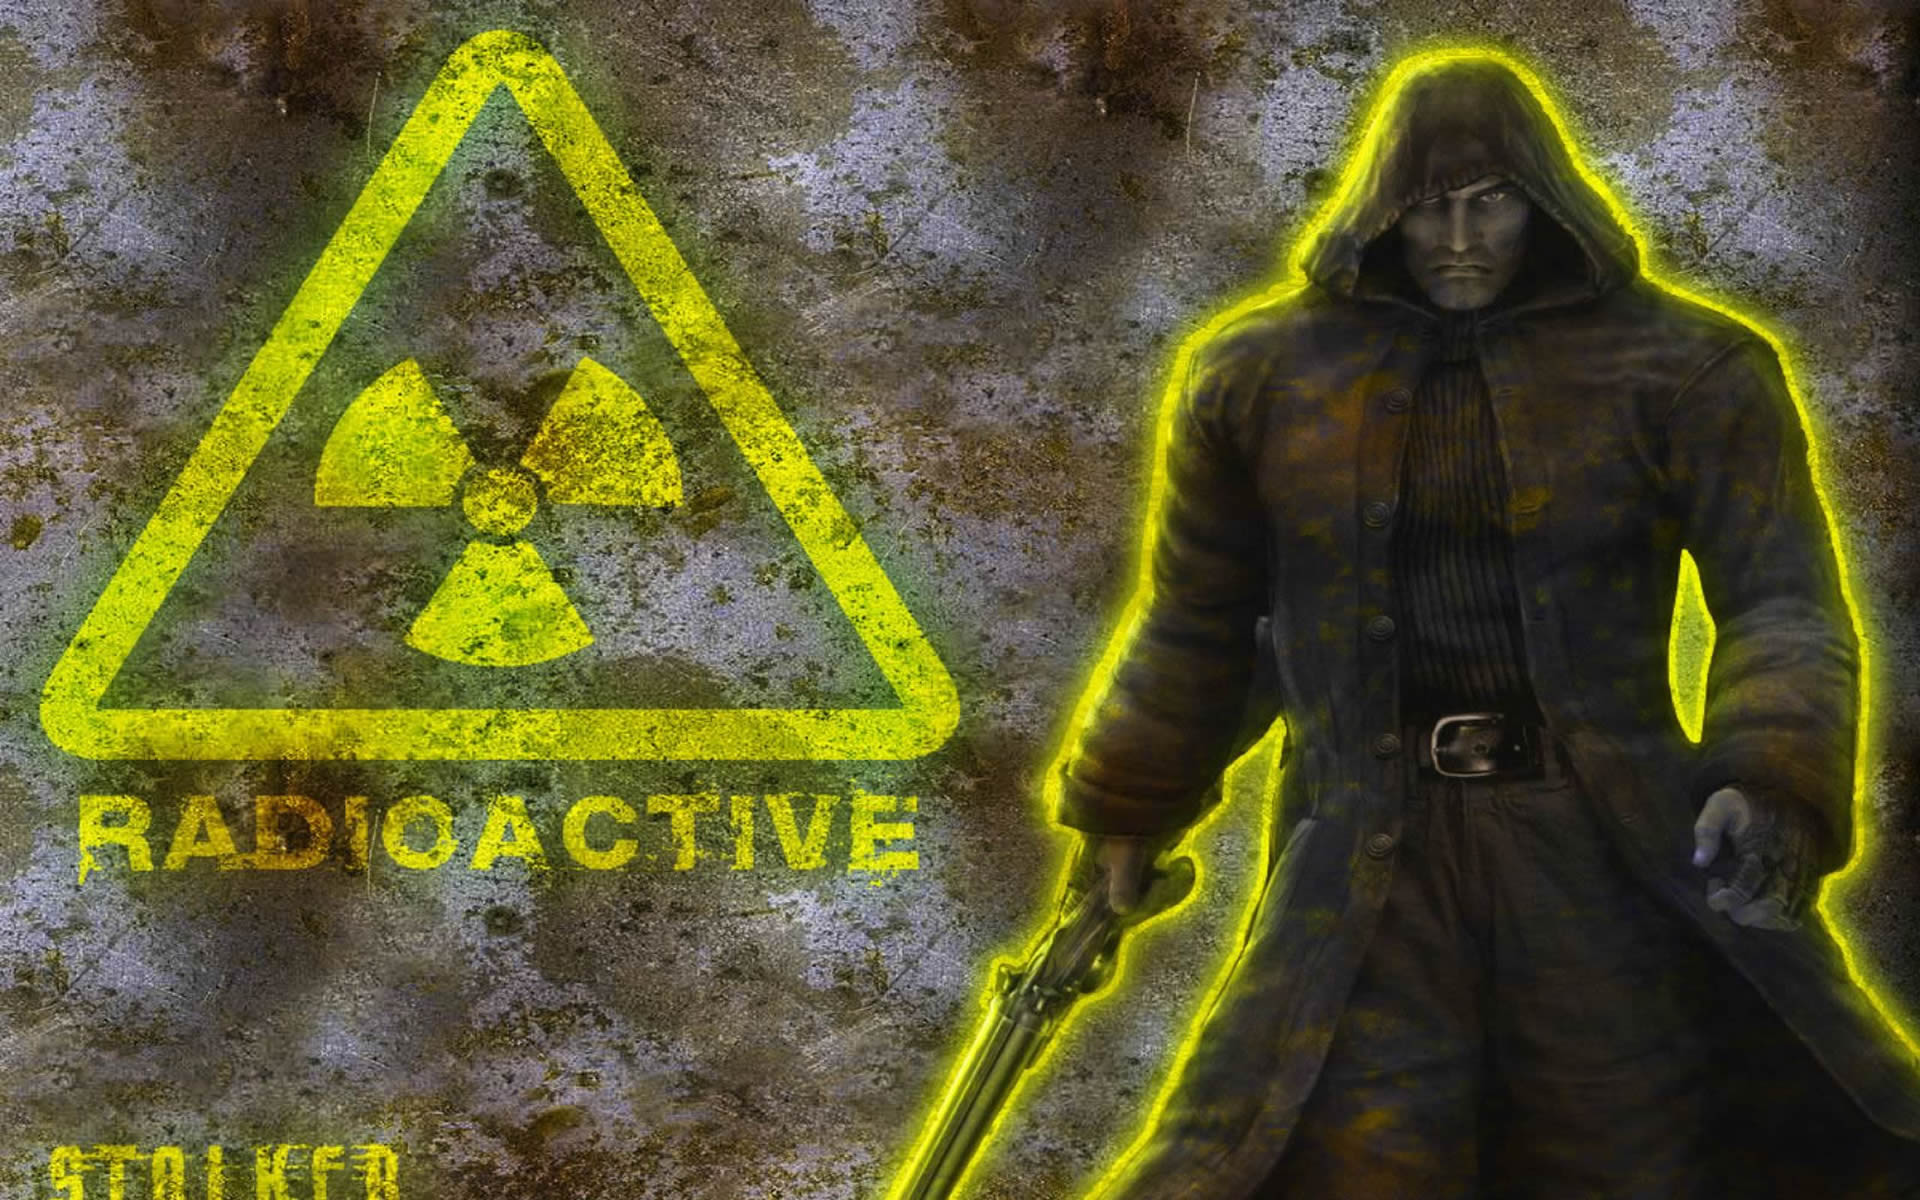 Radioactive Action Rpg Games Wallpaper Image Featuring Stalker